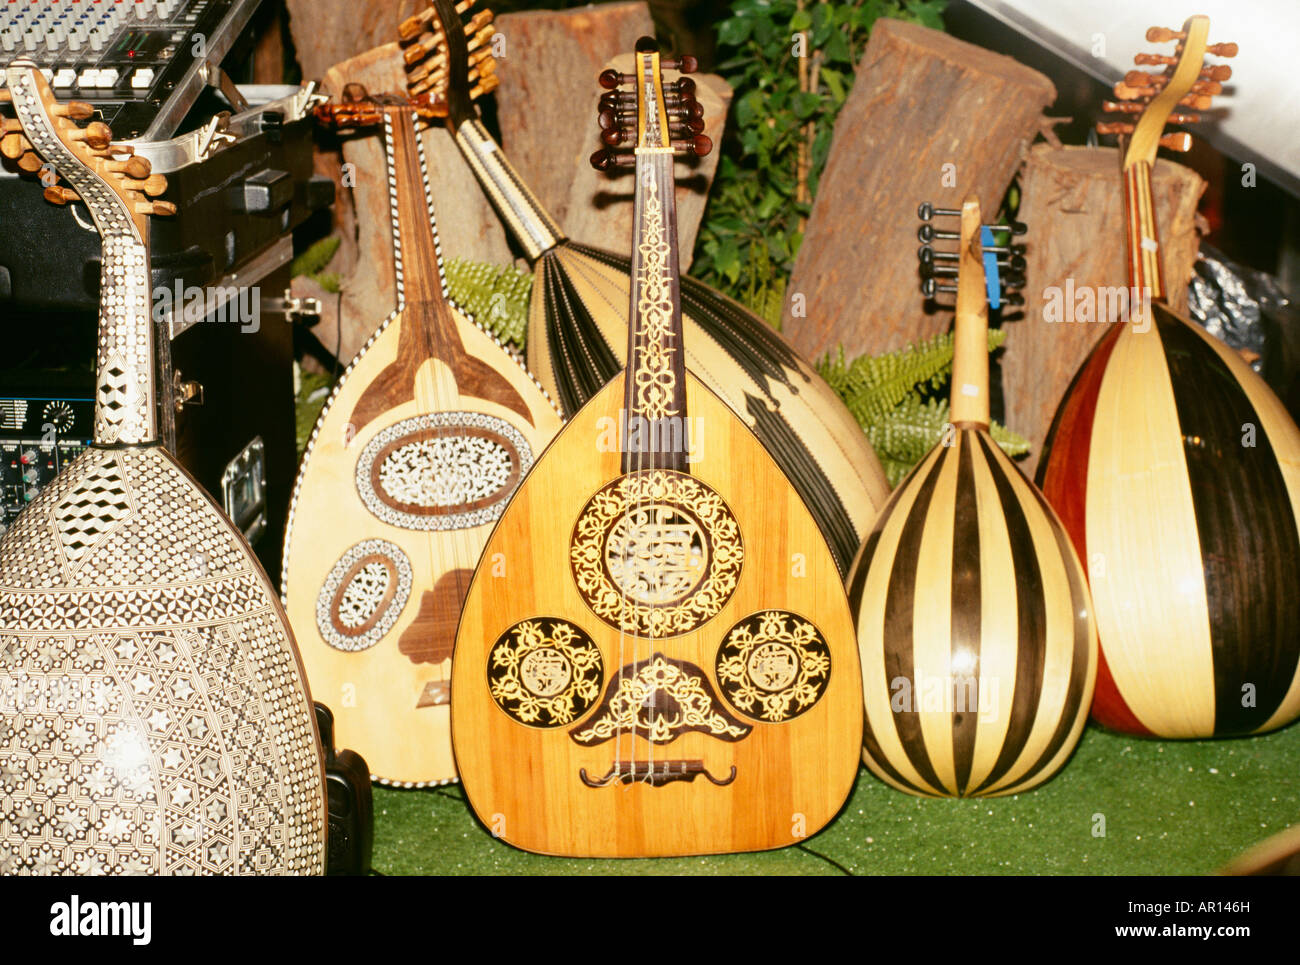 Musical stringed instruments of various shapes and sizes are arranged at one place. Stock Photo